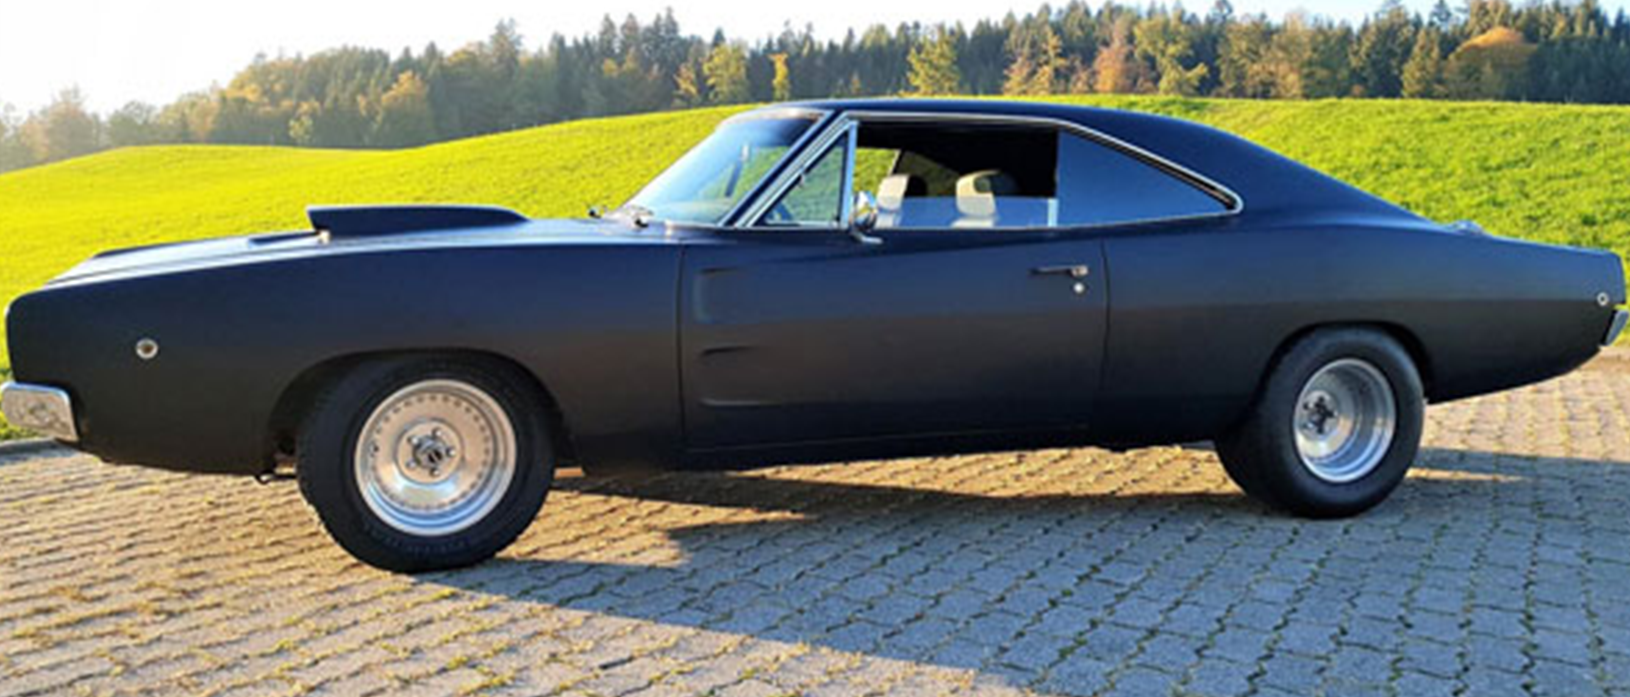 Where is Blade’s 1968 Dodge Charger R/T hiding?